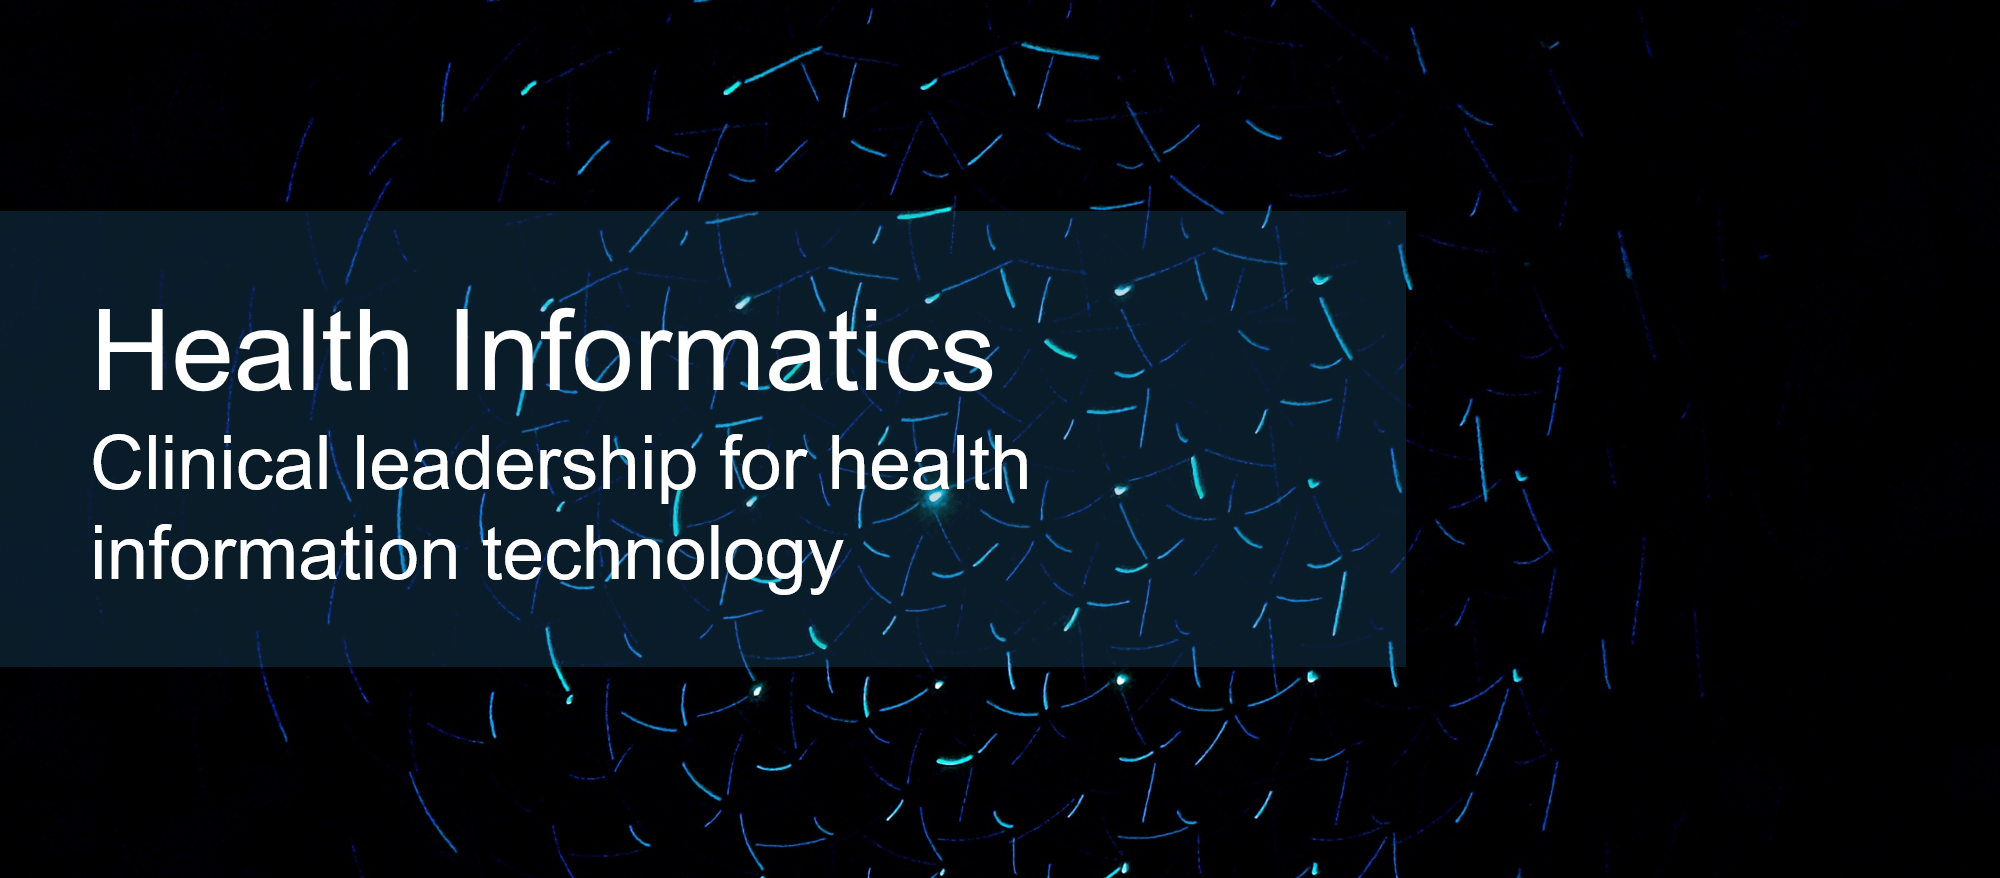 Health Informatics - Clinical leadership for health information technology